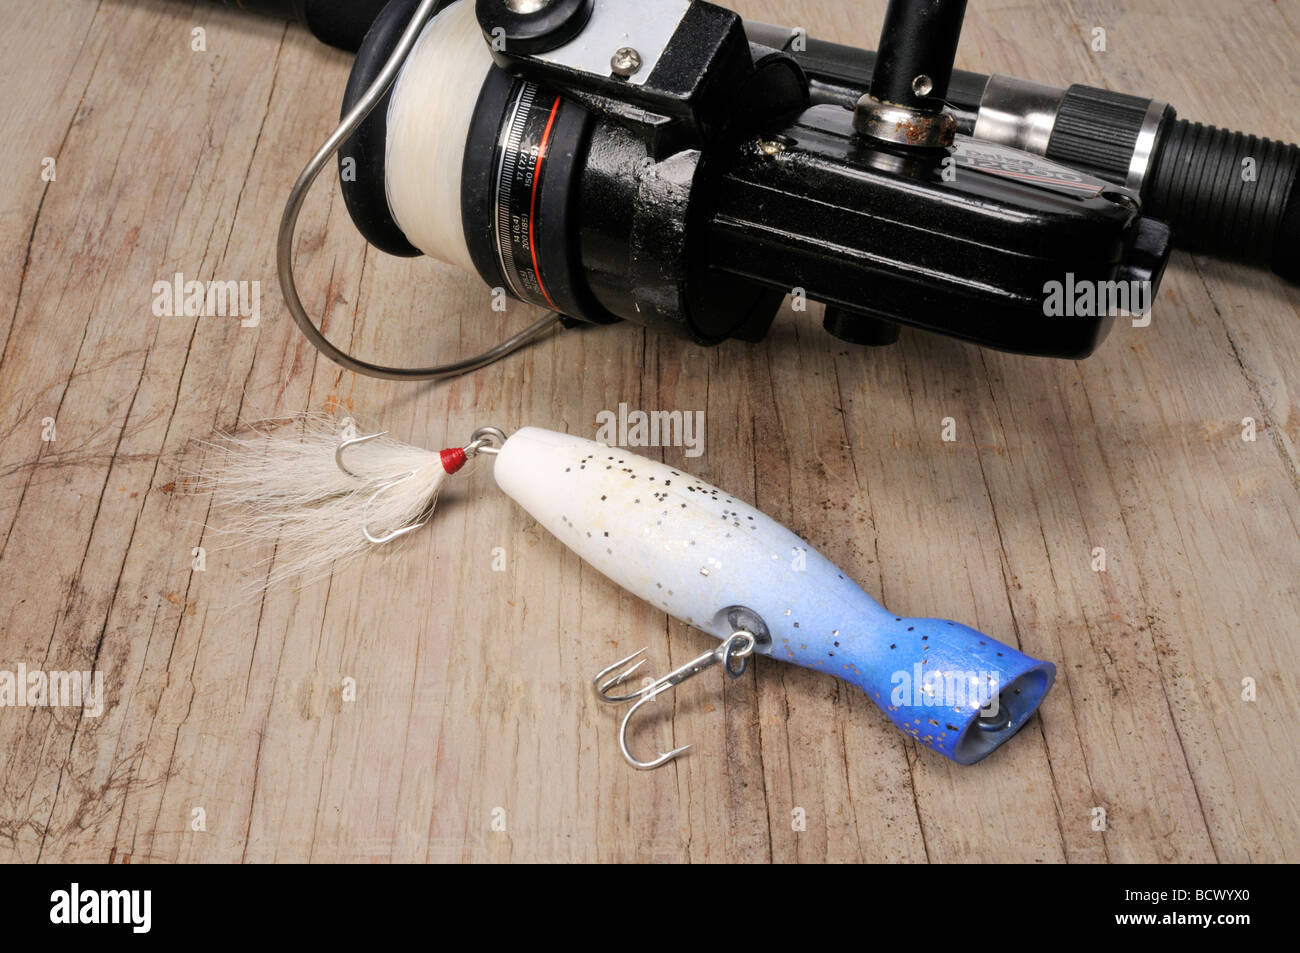 Fishing lure with rod, blue and white popper with treble hooks and buck tail and spinning rod & reel on wood Stock Photo